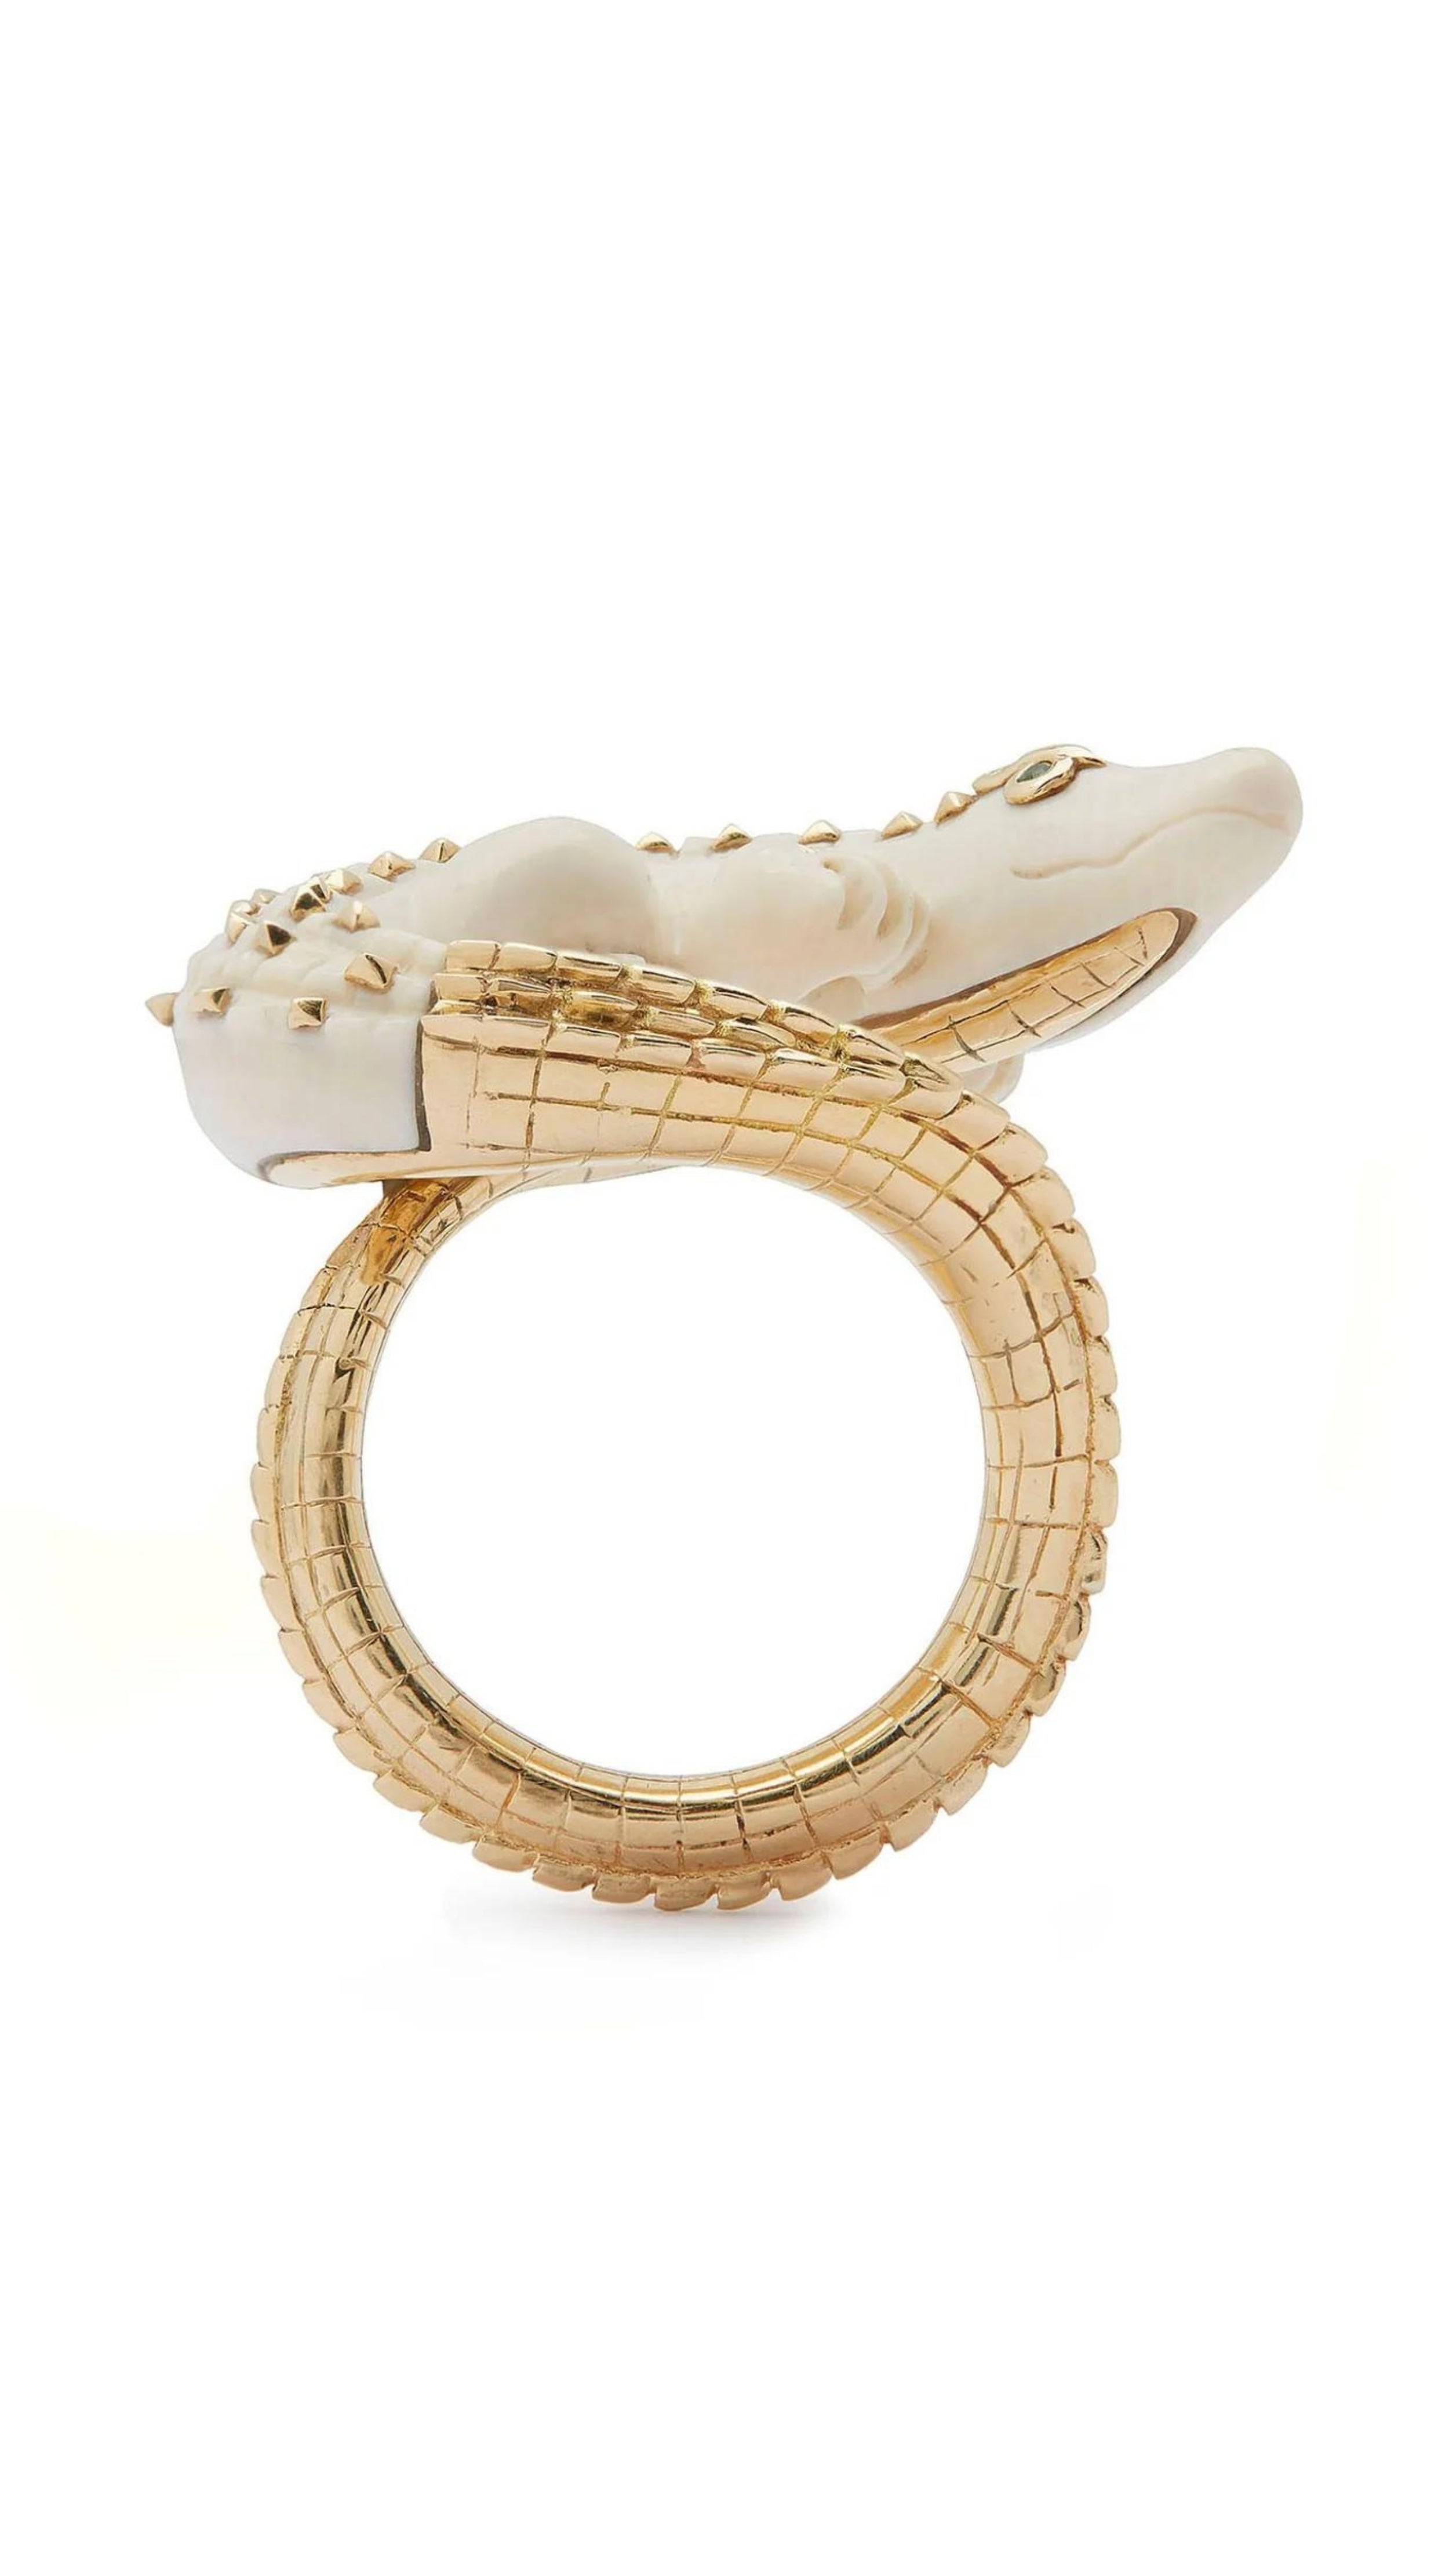 Bibi van der Velden Mammoth Alligator Twist Ring. Crafted in mamoth tusk in the shape of an alligator that curves around the finger. The tail is made from 18K gold and the ivory body has 18K gold studs. The ring is shown from the bottom